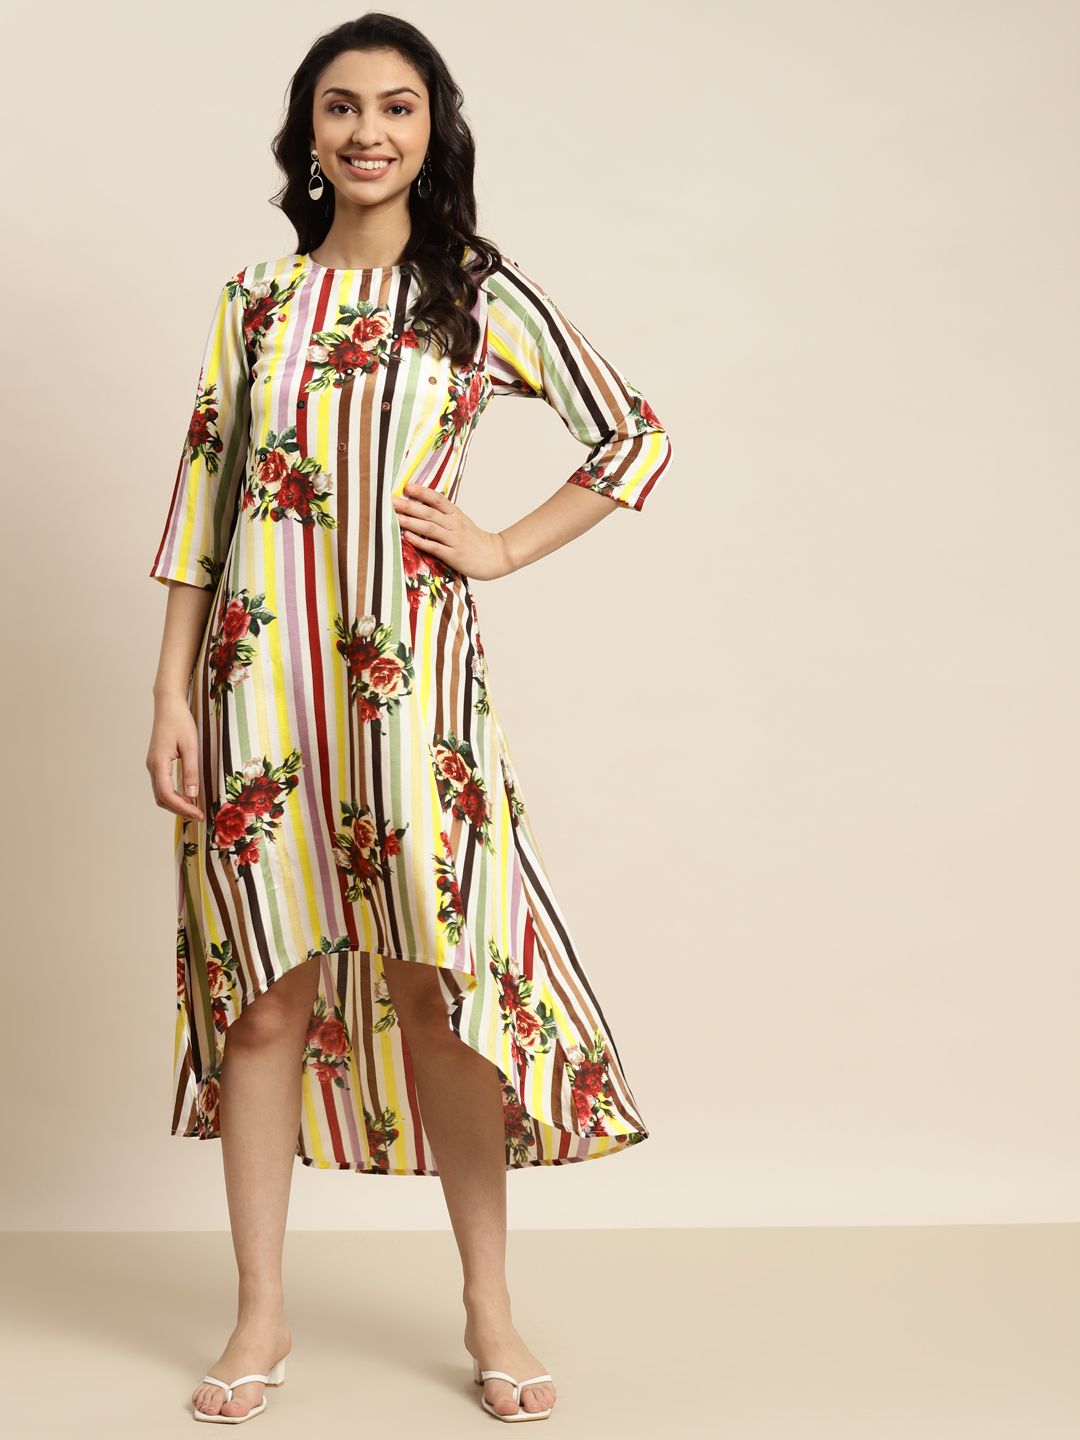 Shae by SASSAFRAS White & Black Floral High Low Ethnic A-Line Midi Dress Price in India